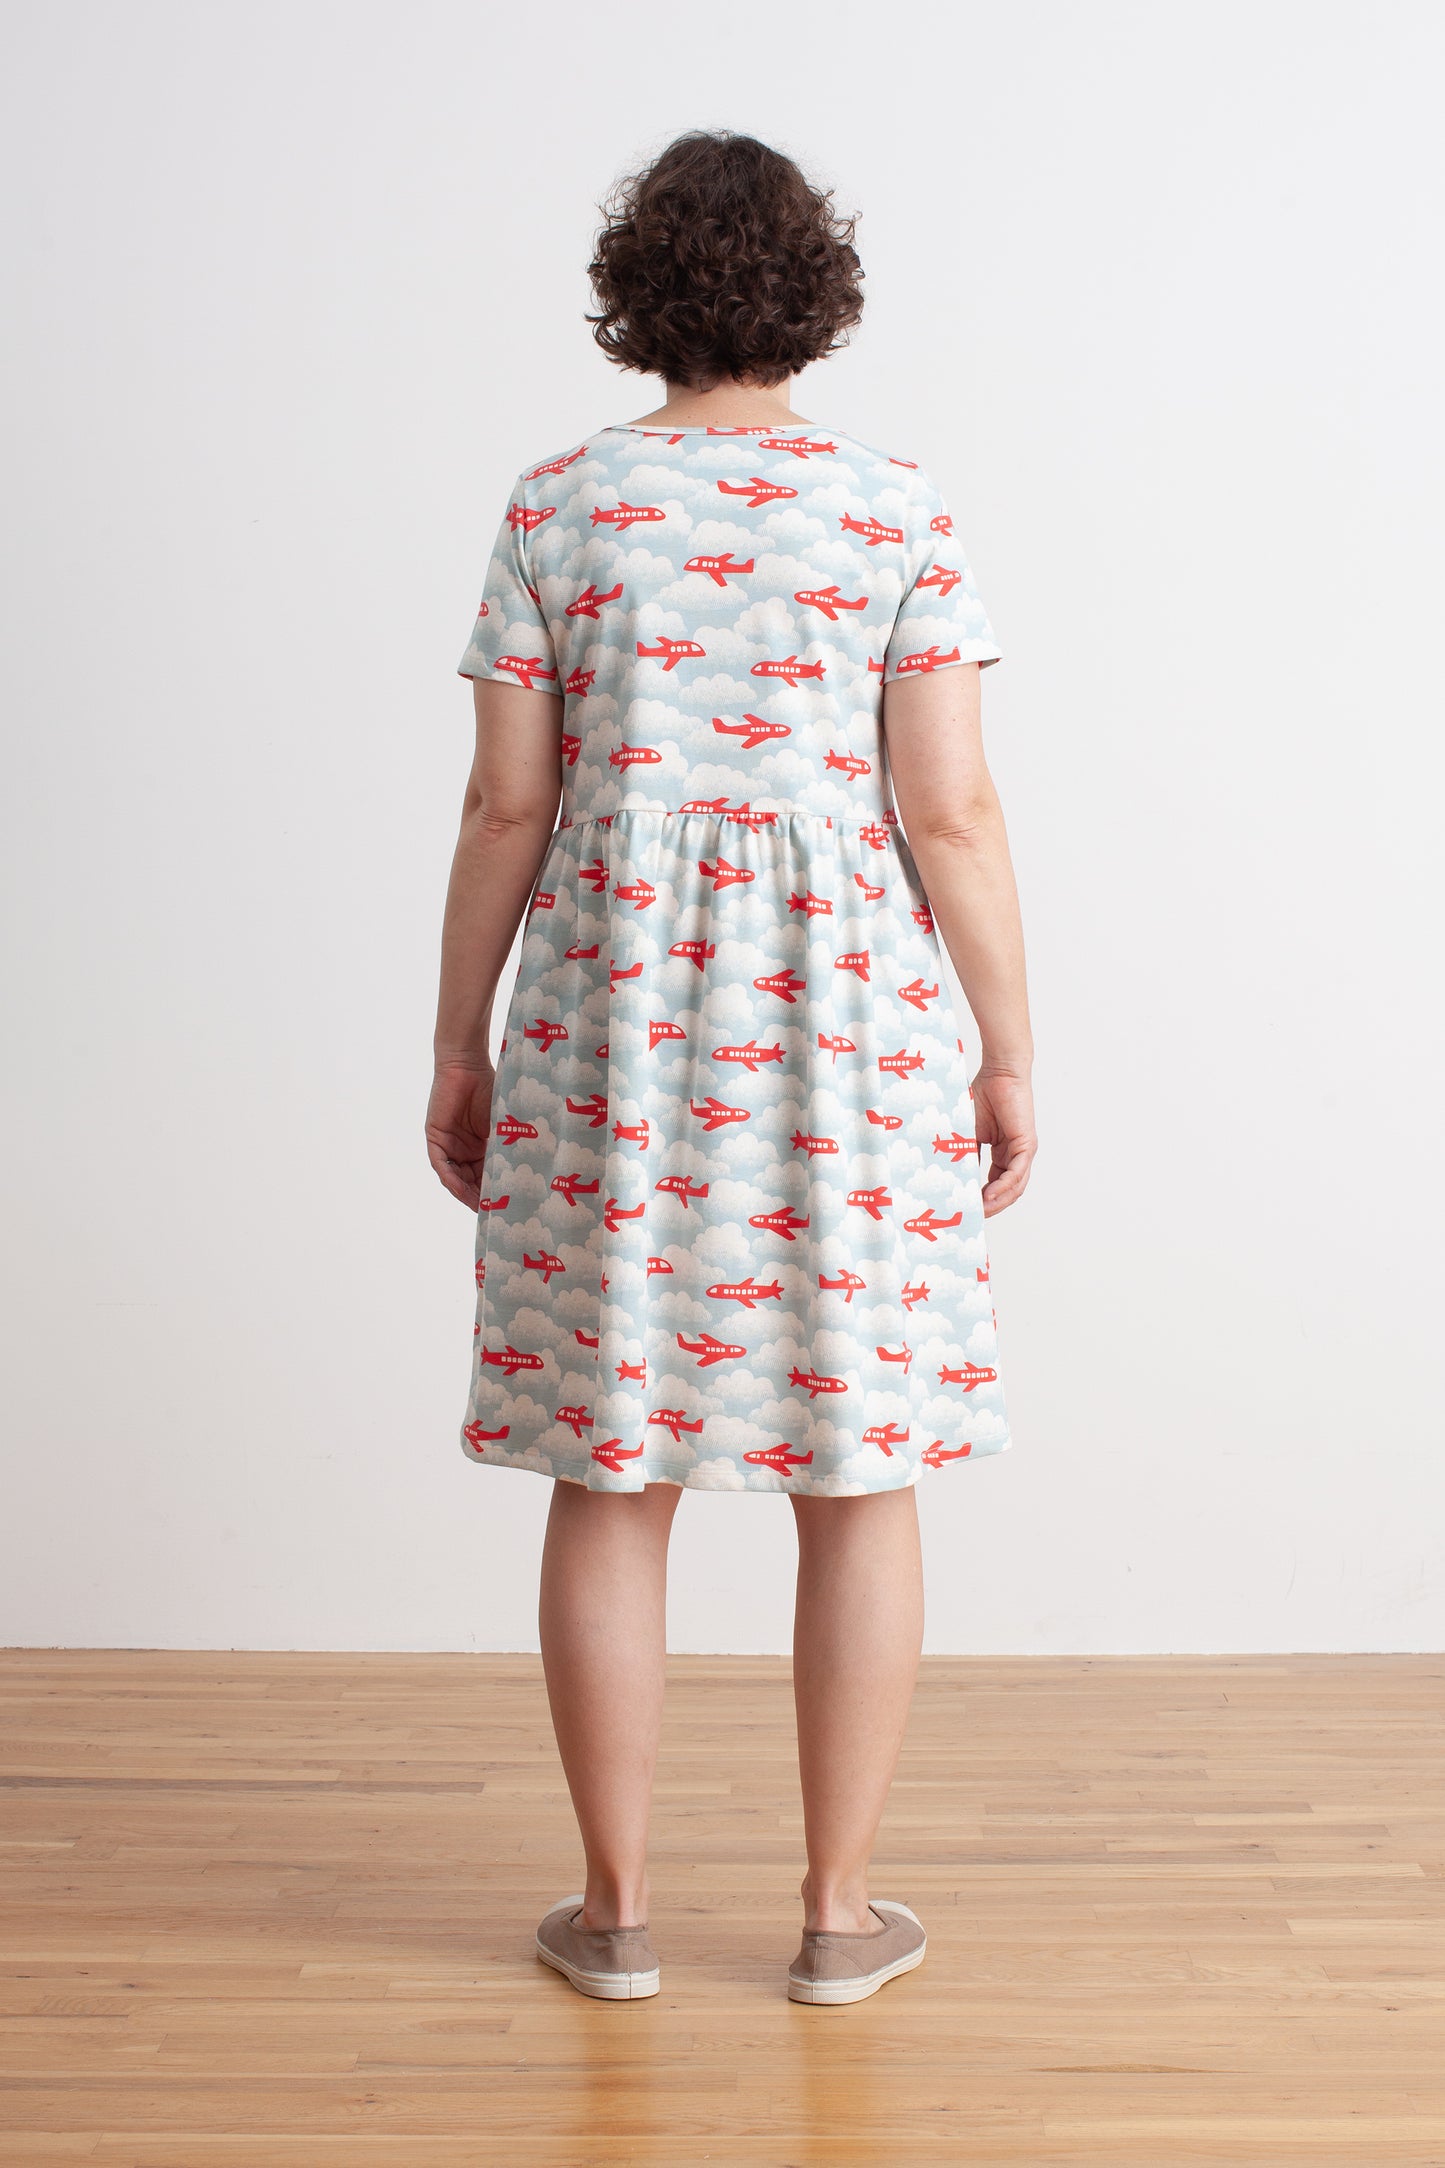 Women's Stockholm Dress - Airplanes Red & Blue